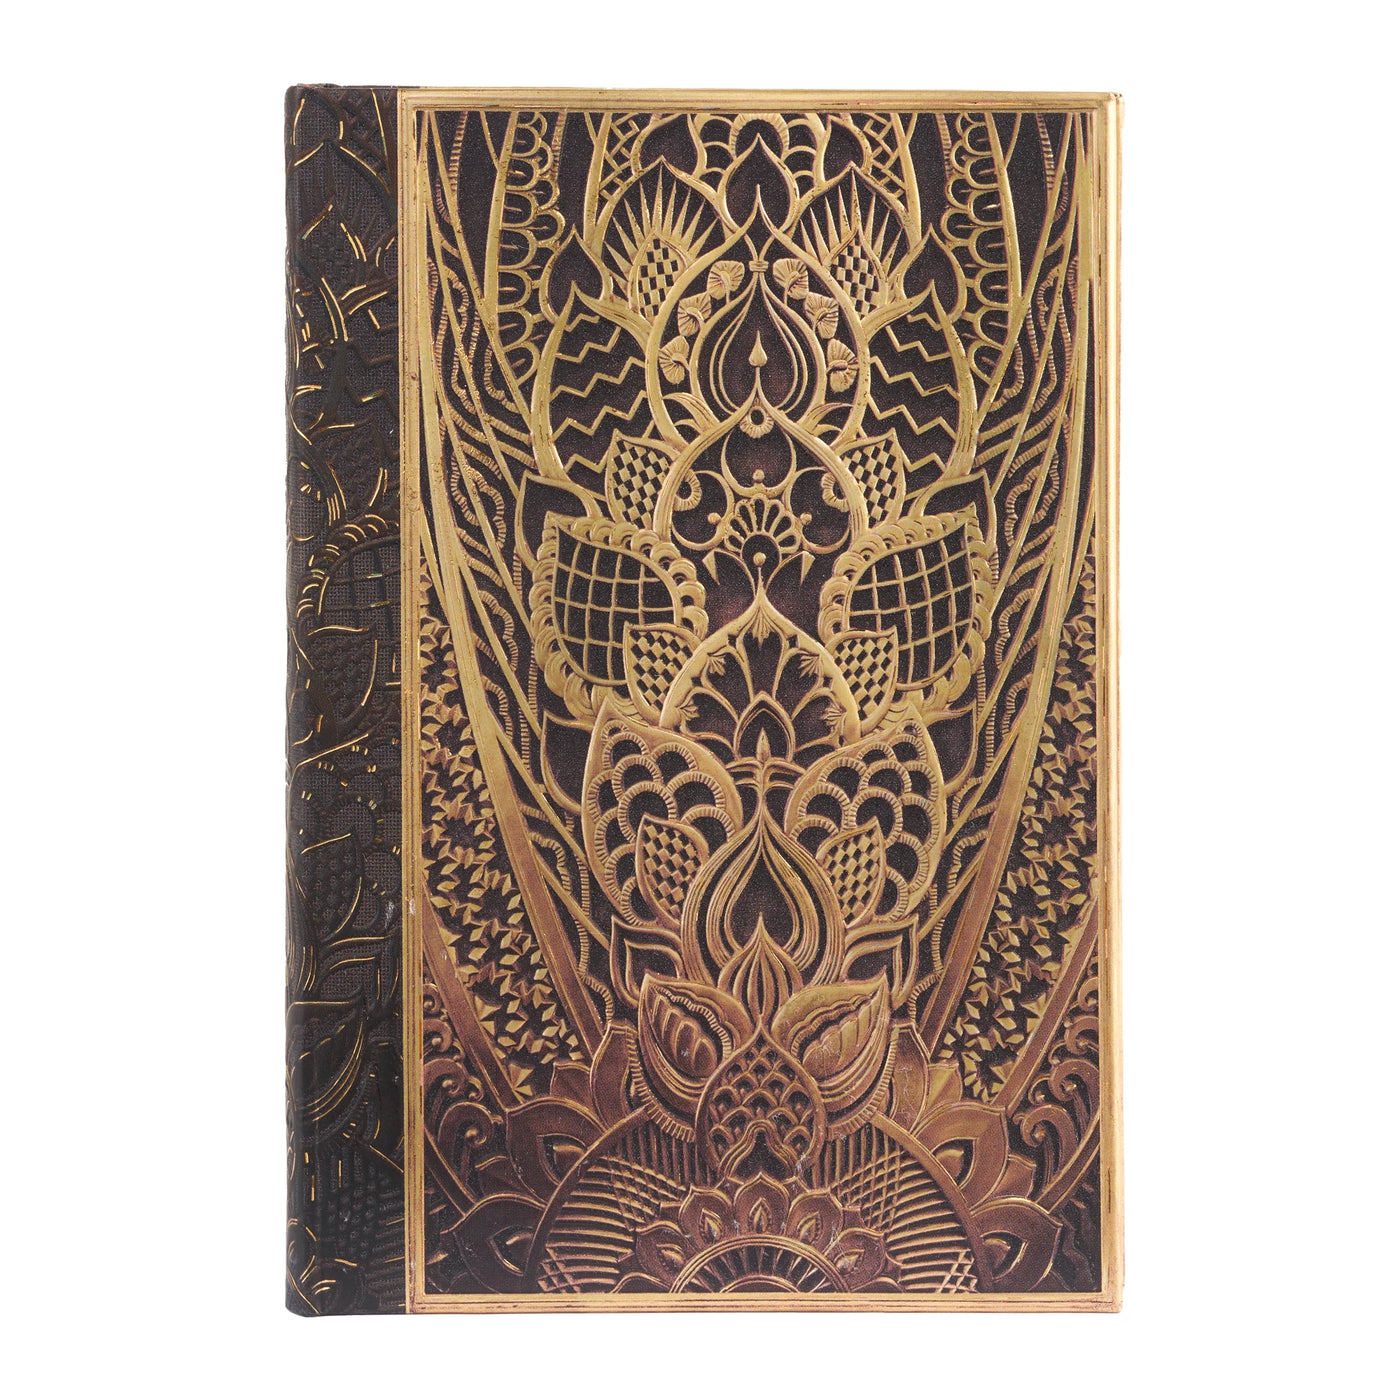 Paperblanks NY Deco Chanin Rise Mini 3.75 x 5.5 Inch Journal